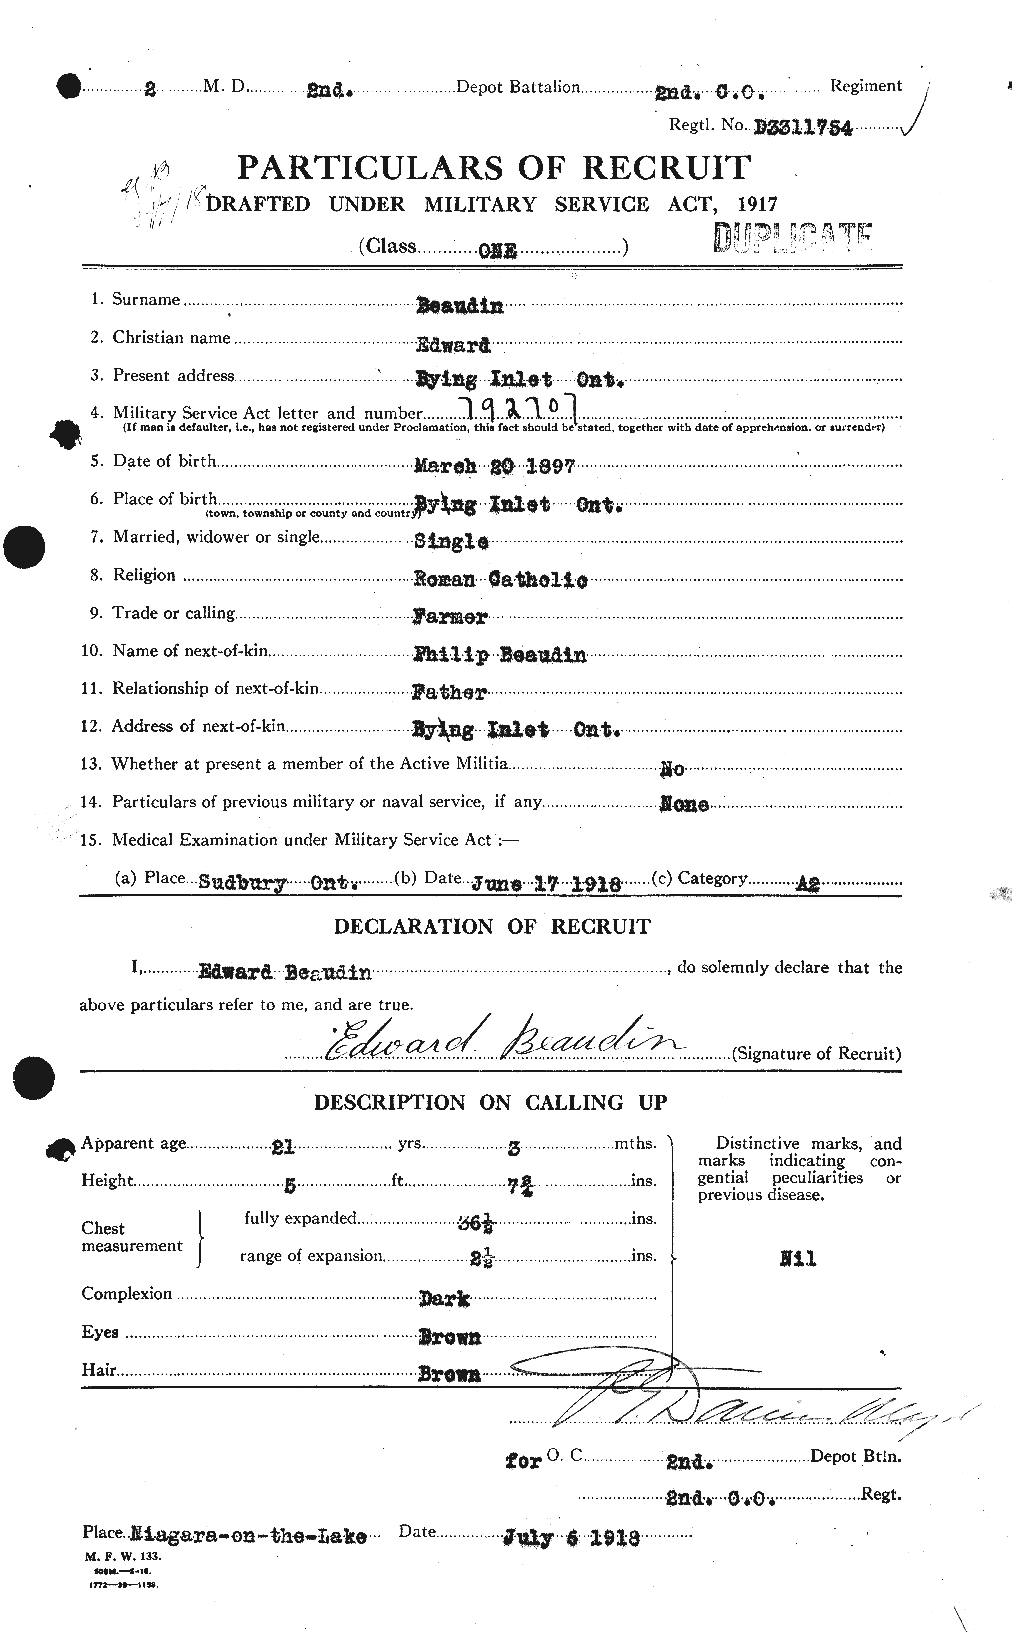 Personnel Records of the First World War - CEF 231160a